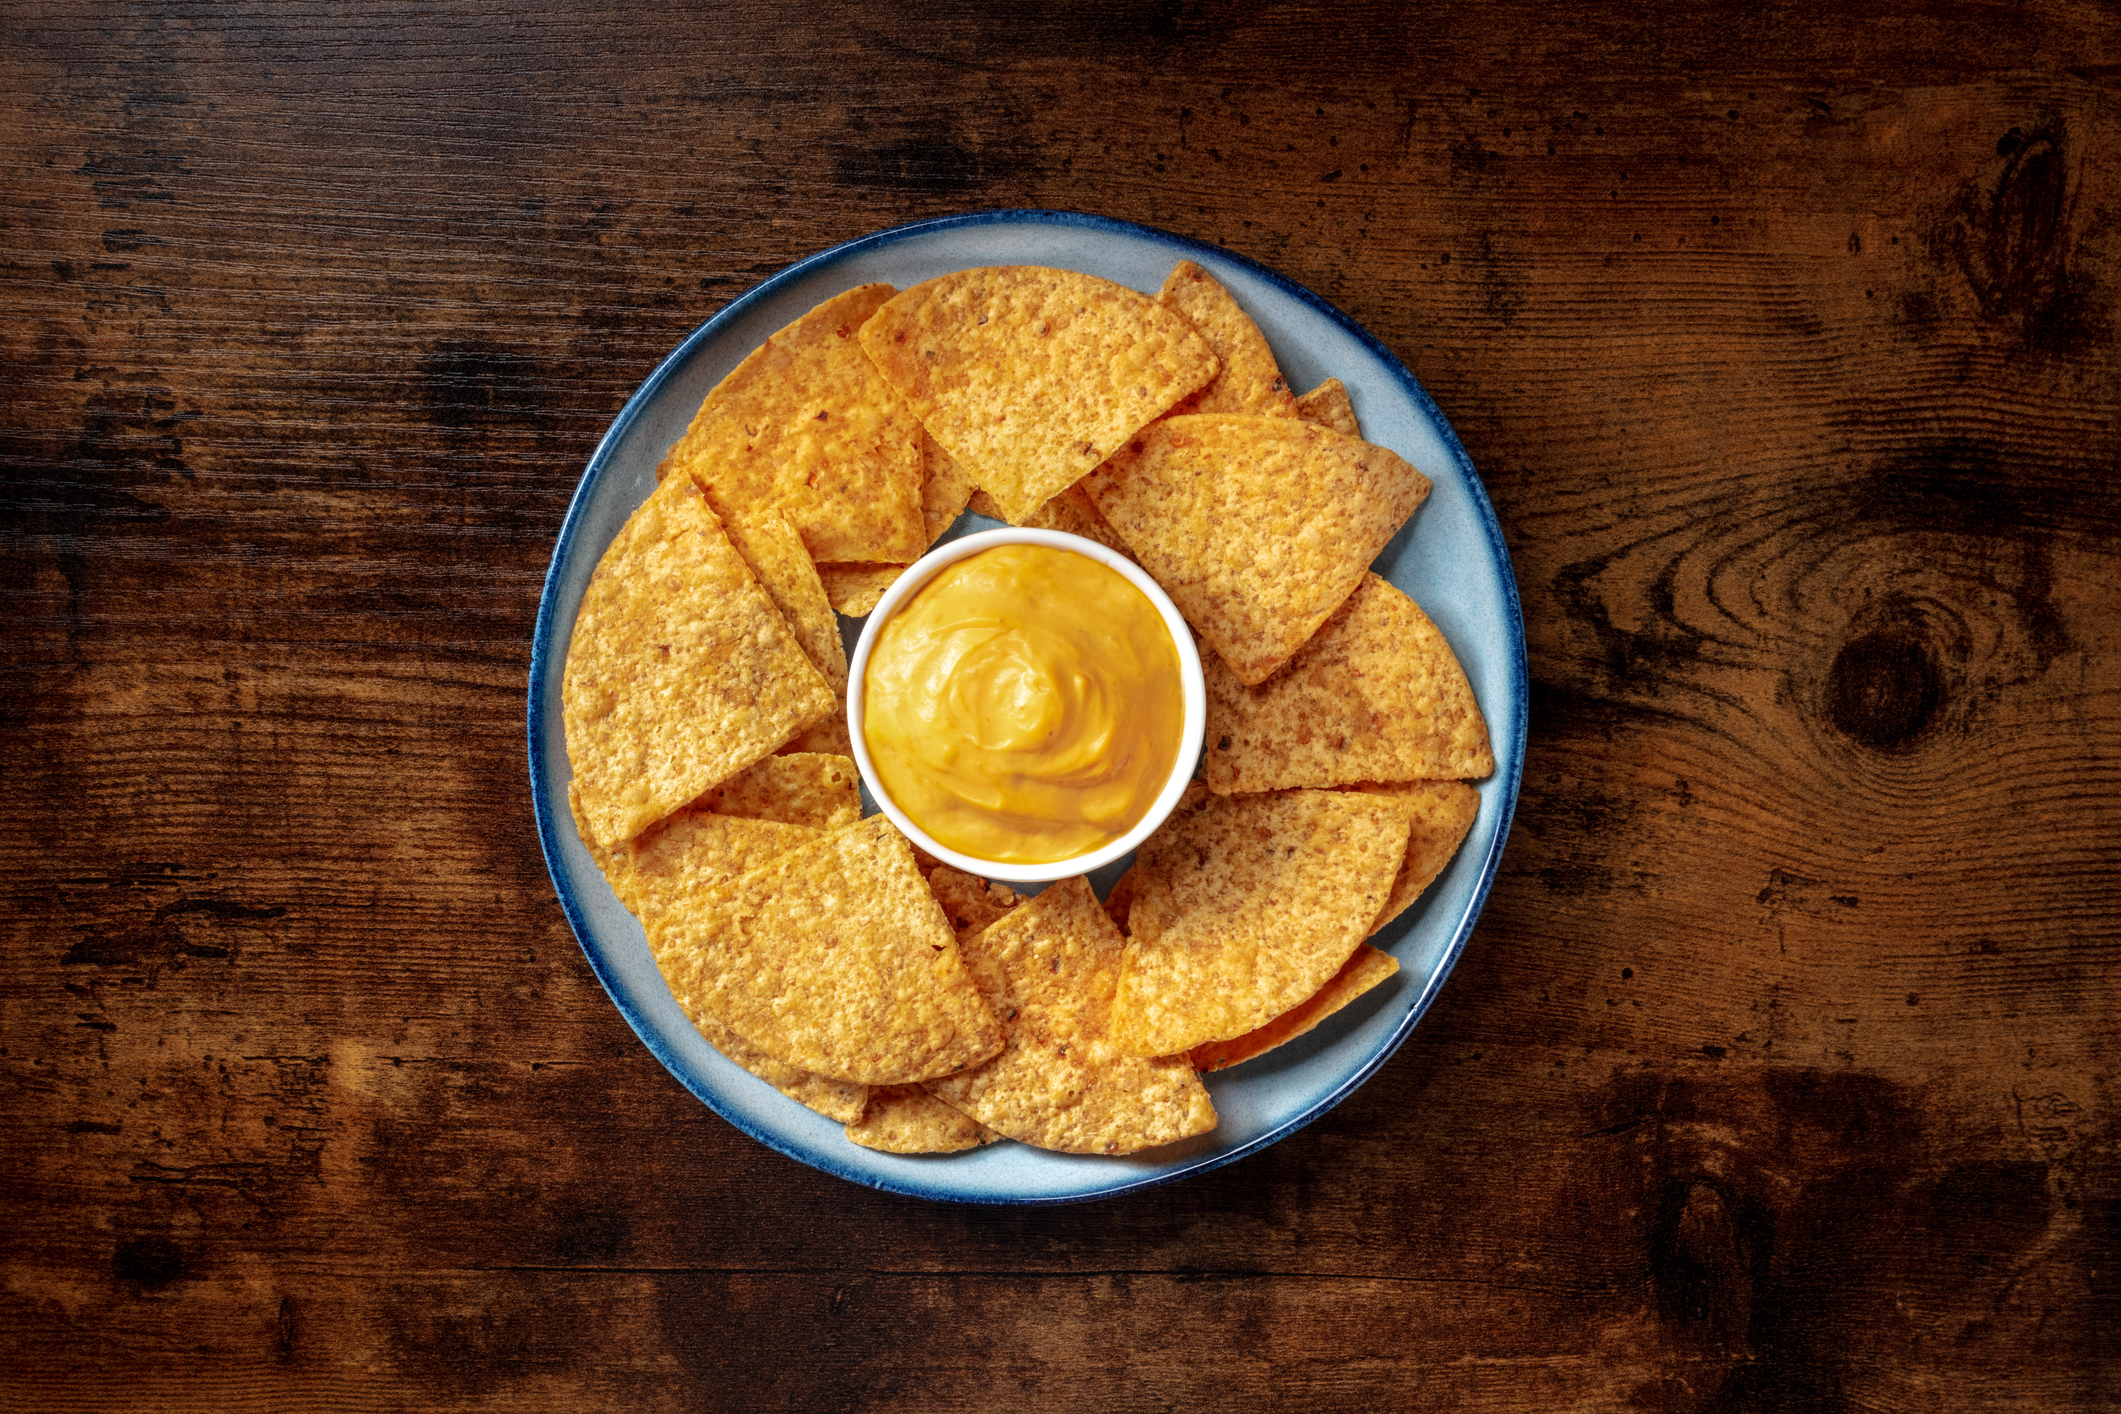 Chips with cheese sauce